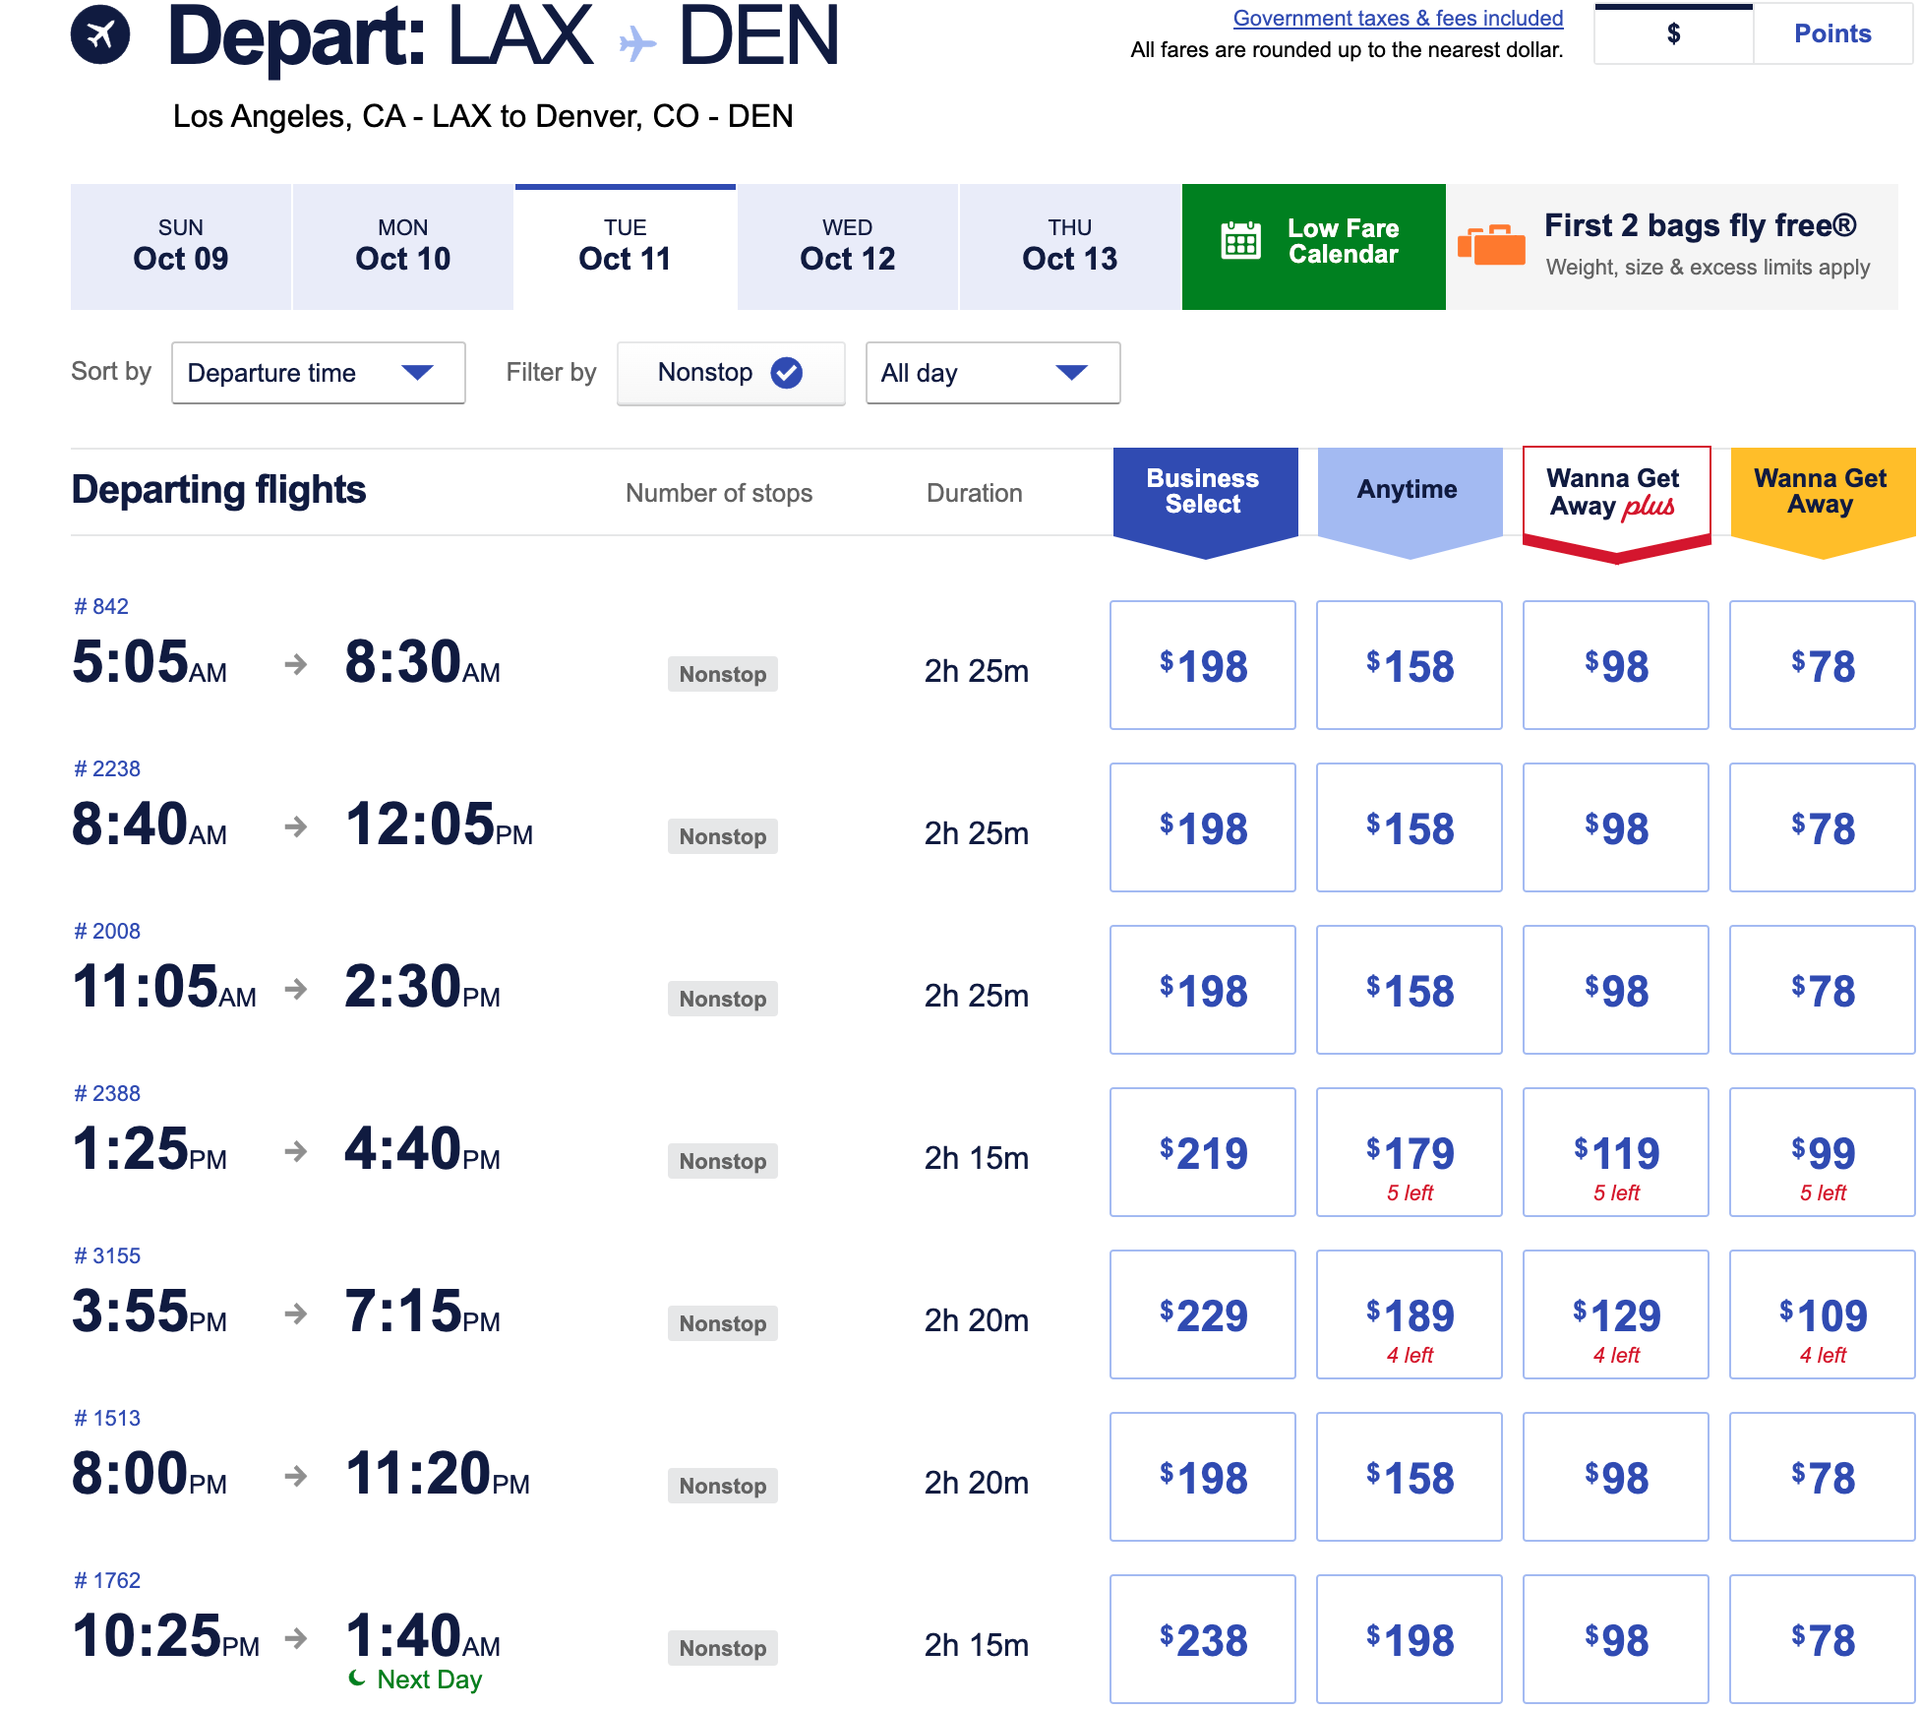 Southwest Airlines fall sale: One-way fares starting at $59 - The